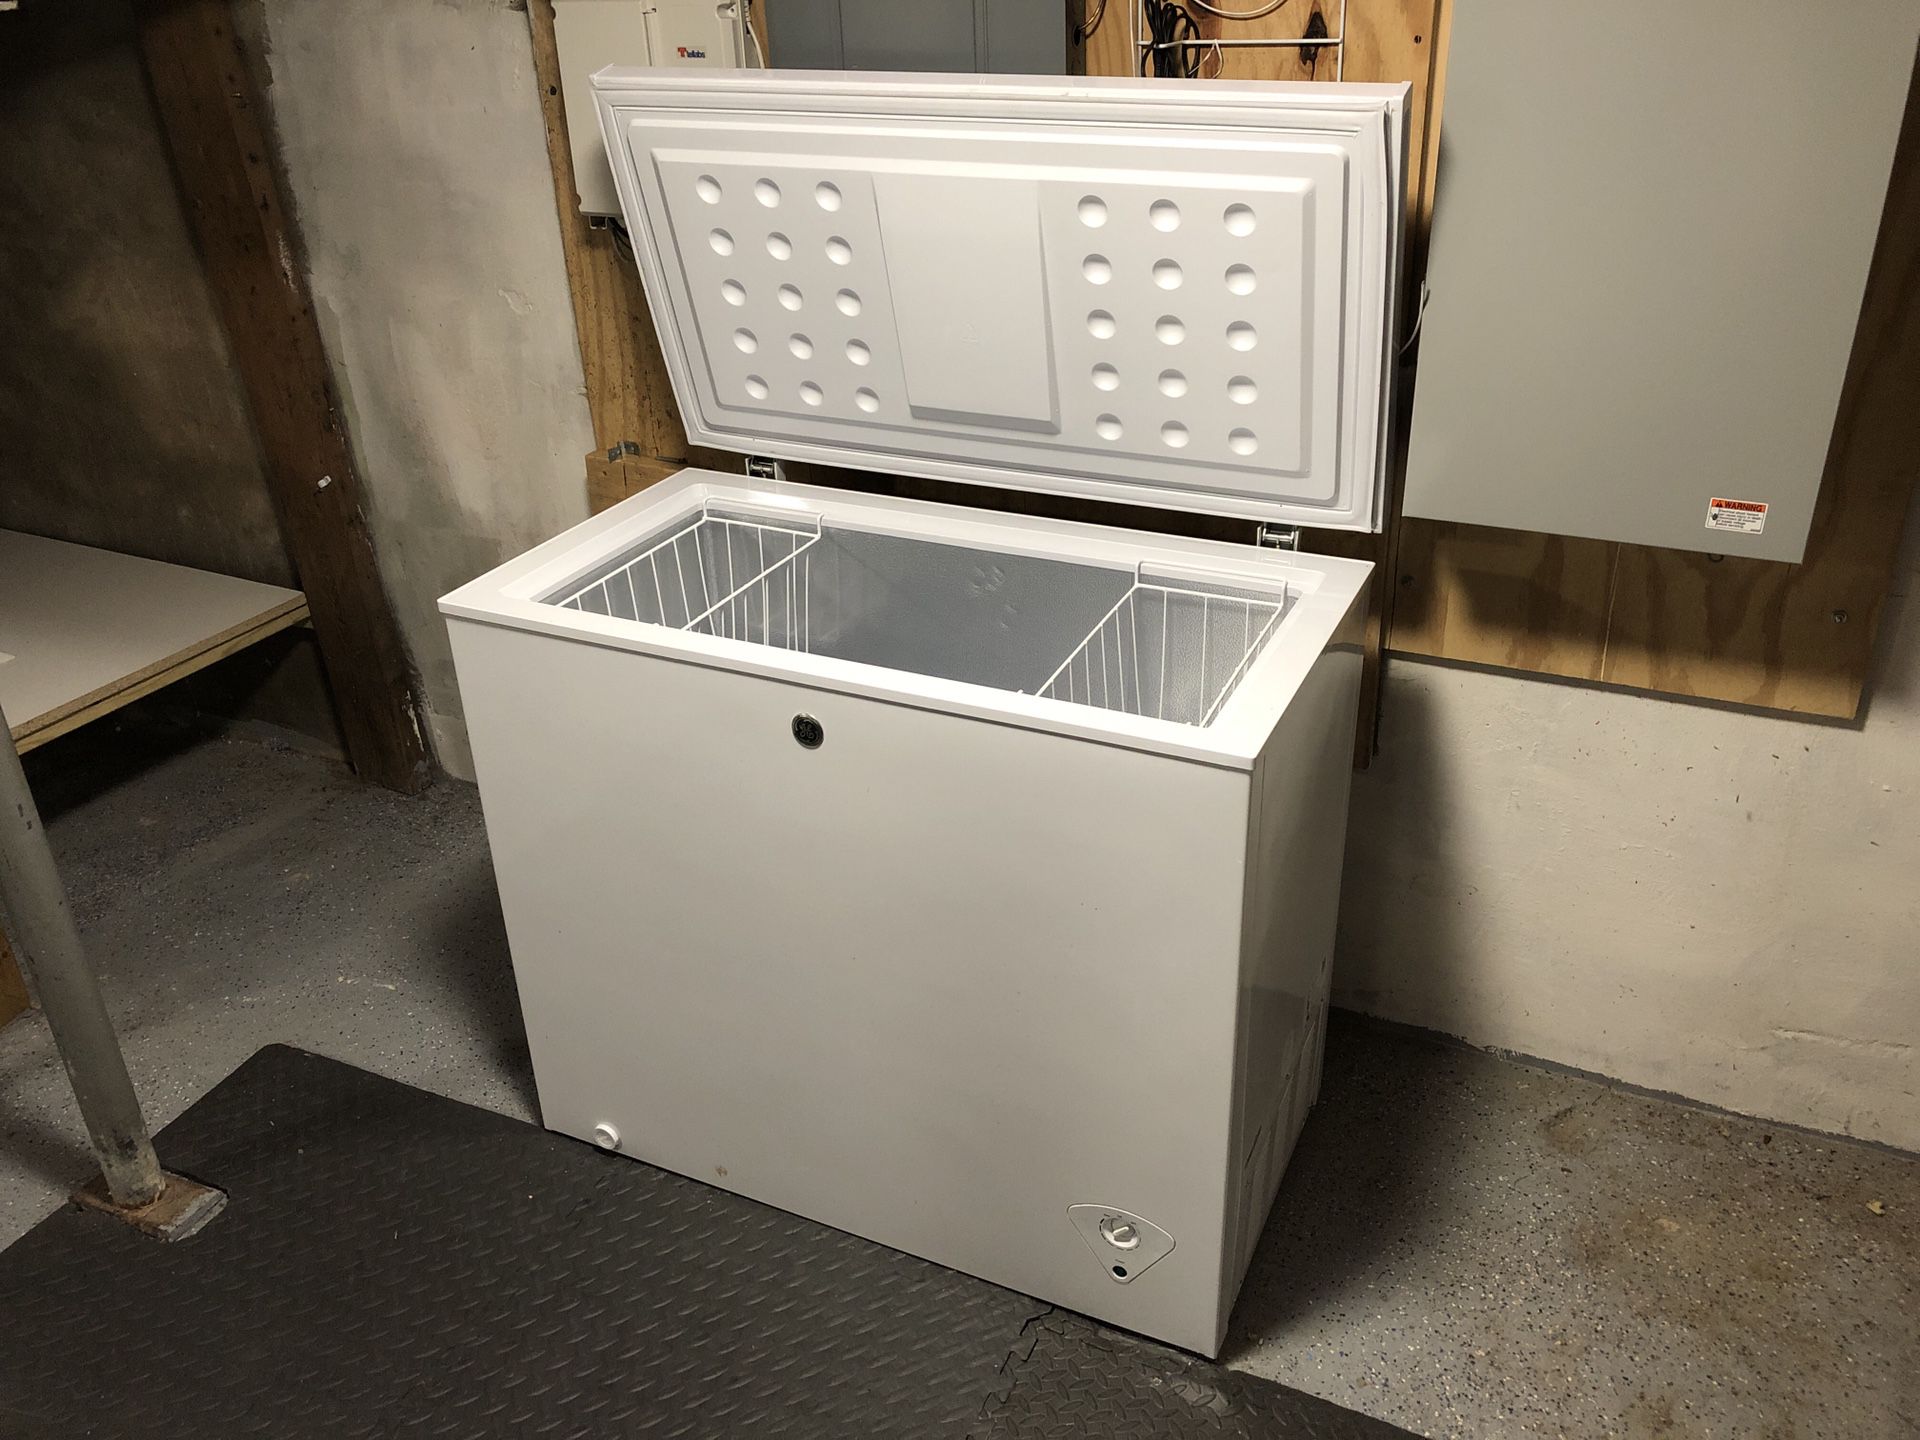 GE Chest freezer..BRAND NEW! Priced to sell quick!